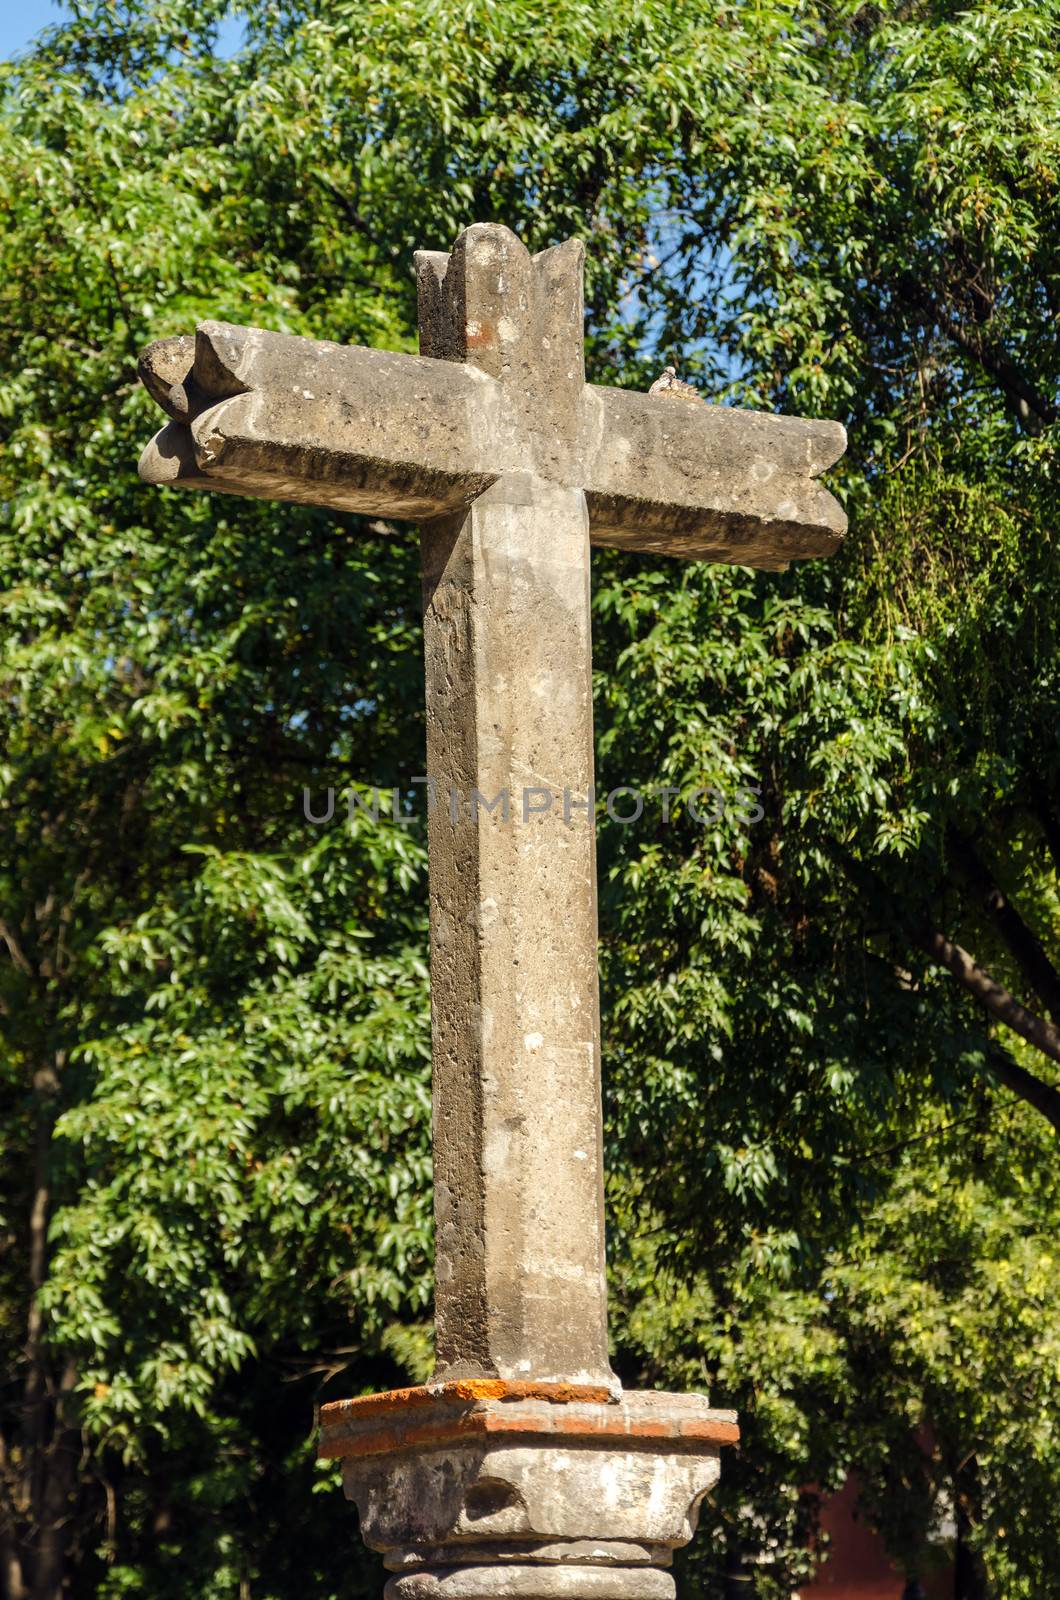 A stone cross in Mexico City with lush green trees in the background